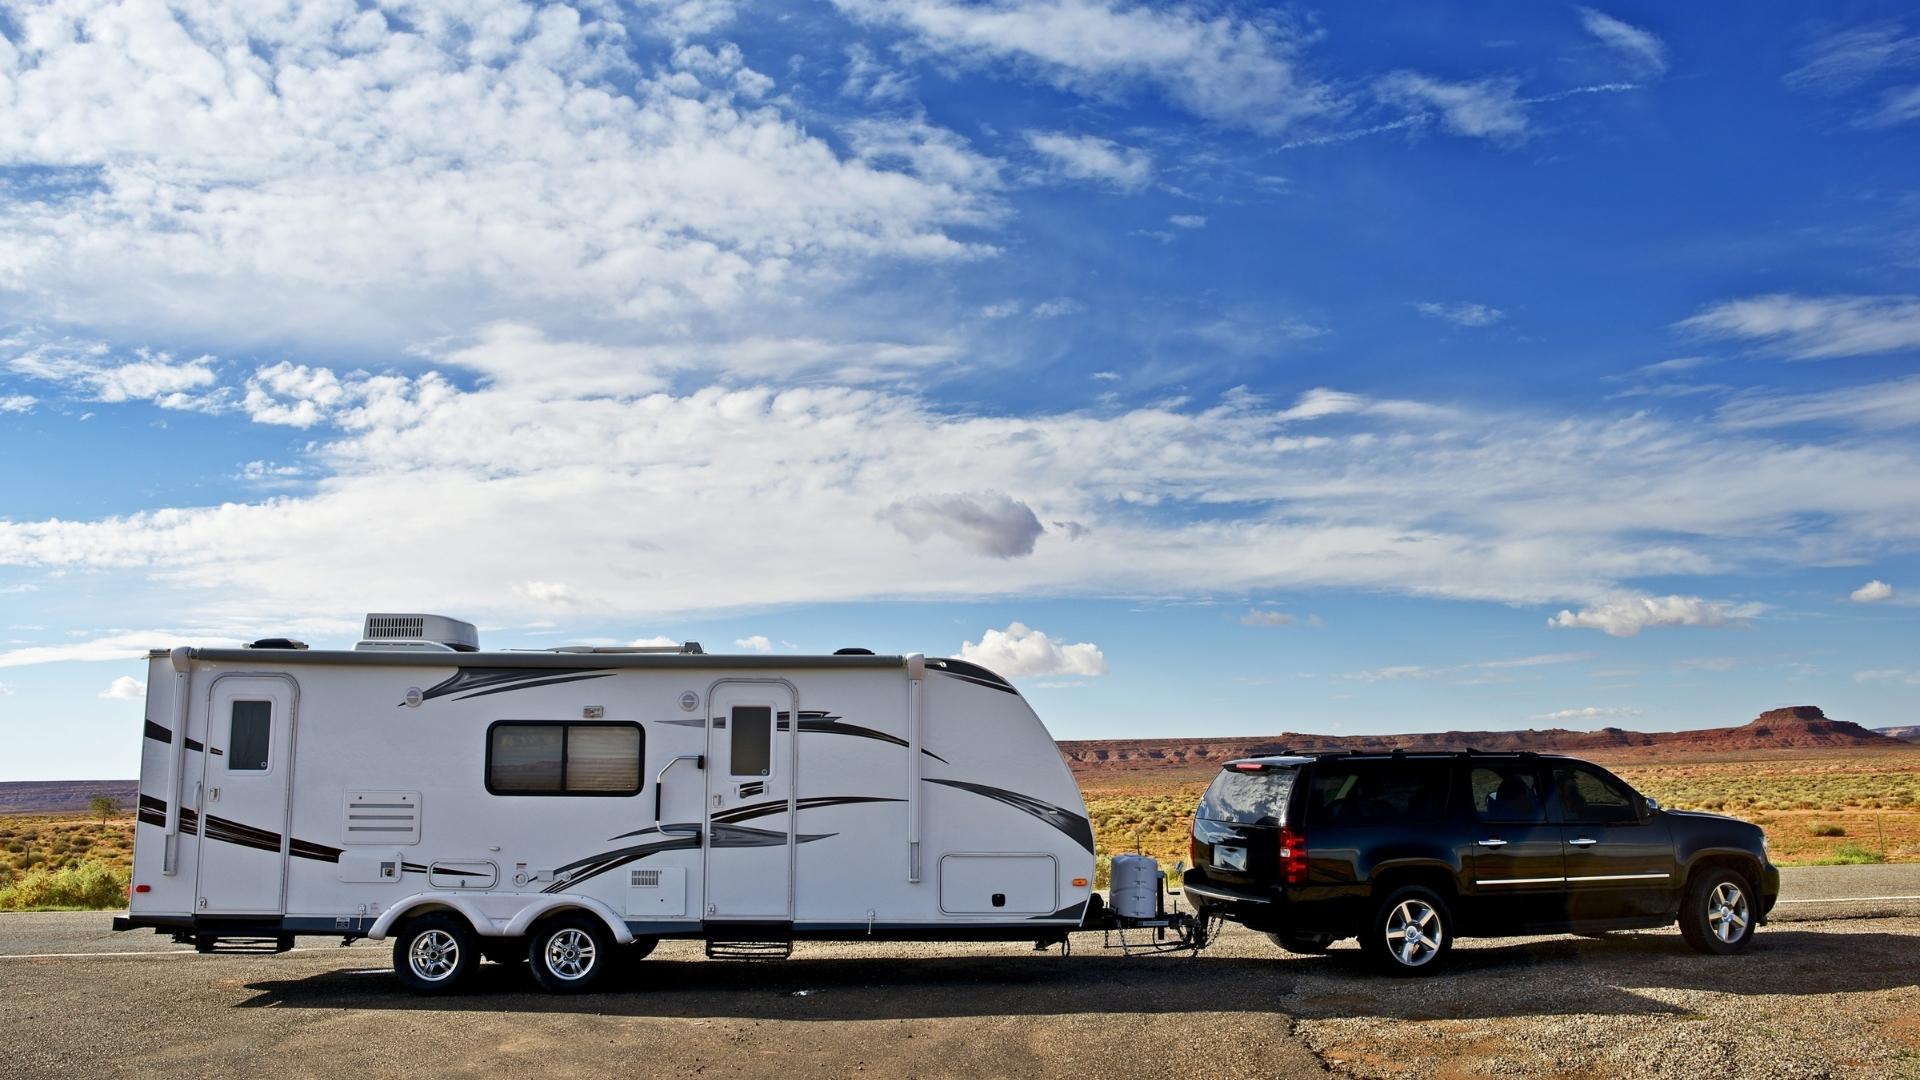 Photo of a vehicle towing a travel trailer